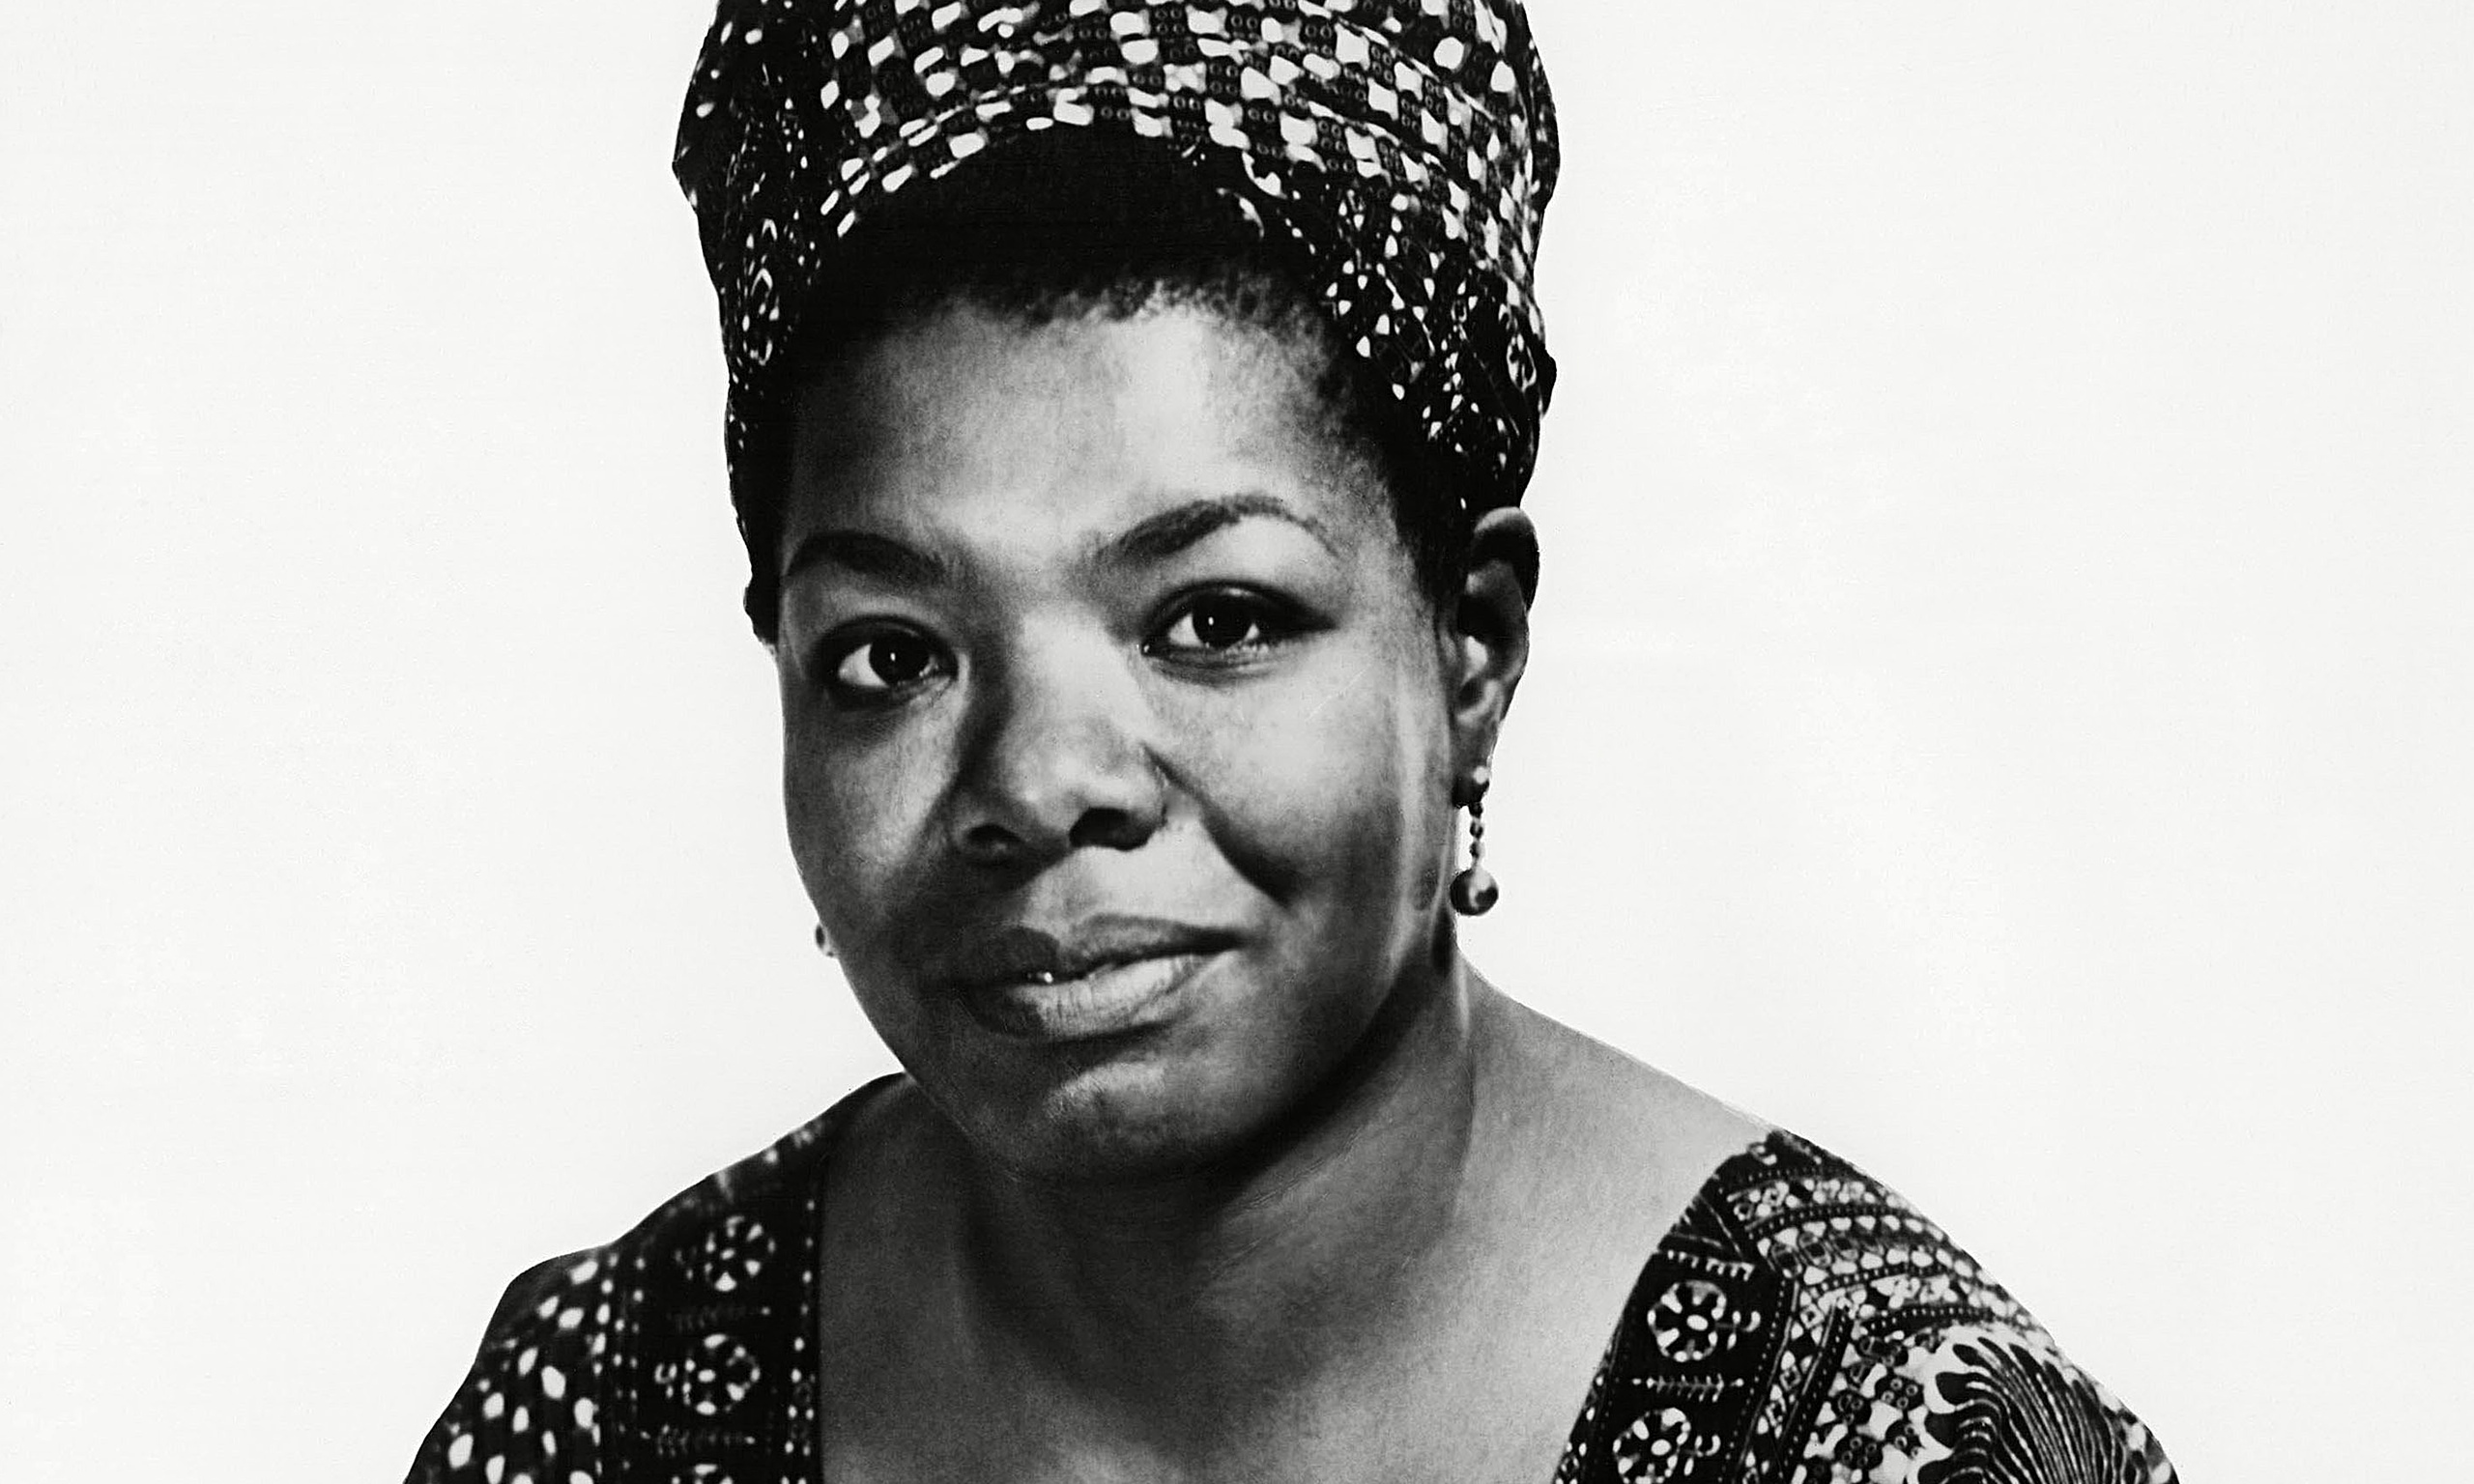 Maya Angelou appreciation – 'The ache for home lives in all of us